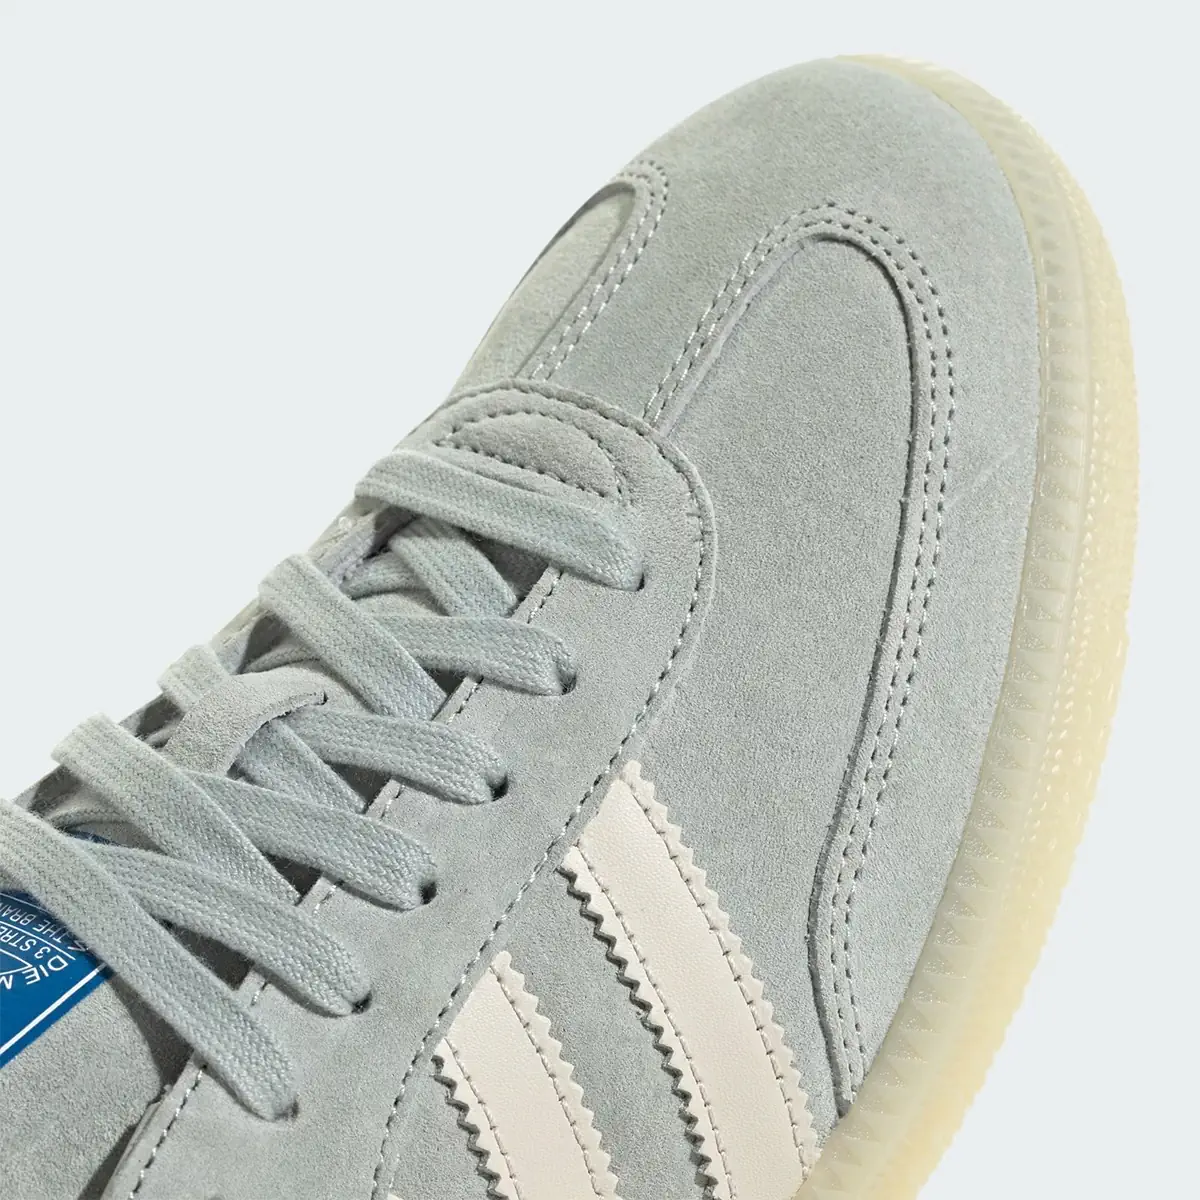 adidas Samba "Wonder Silver" Suede Sneakers Redefine the Classic